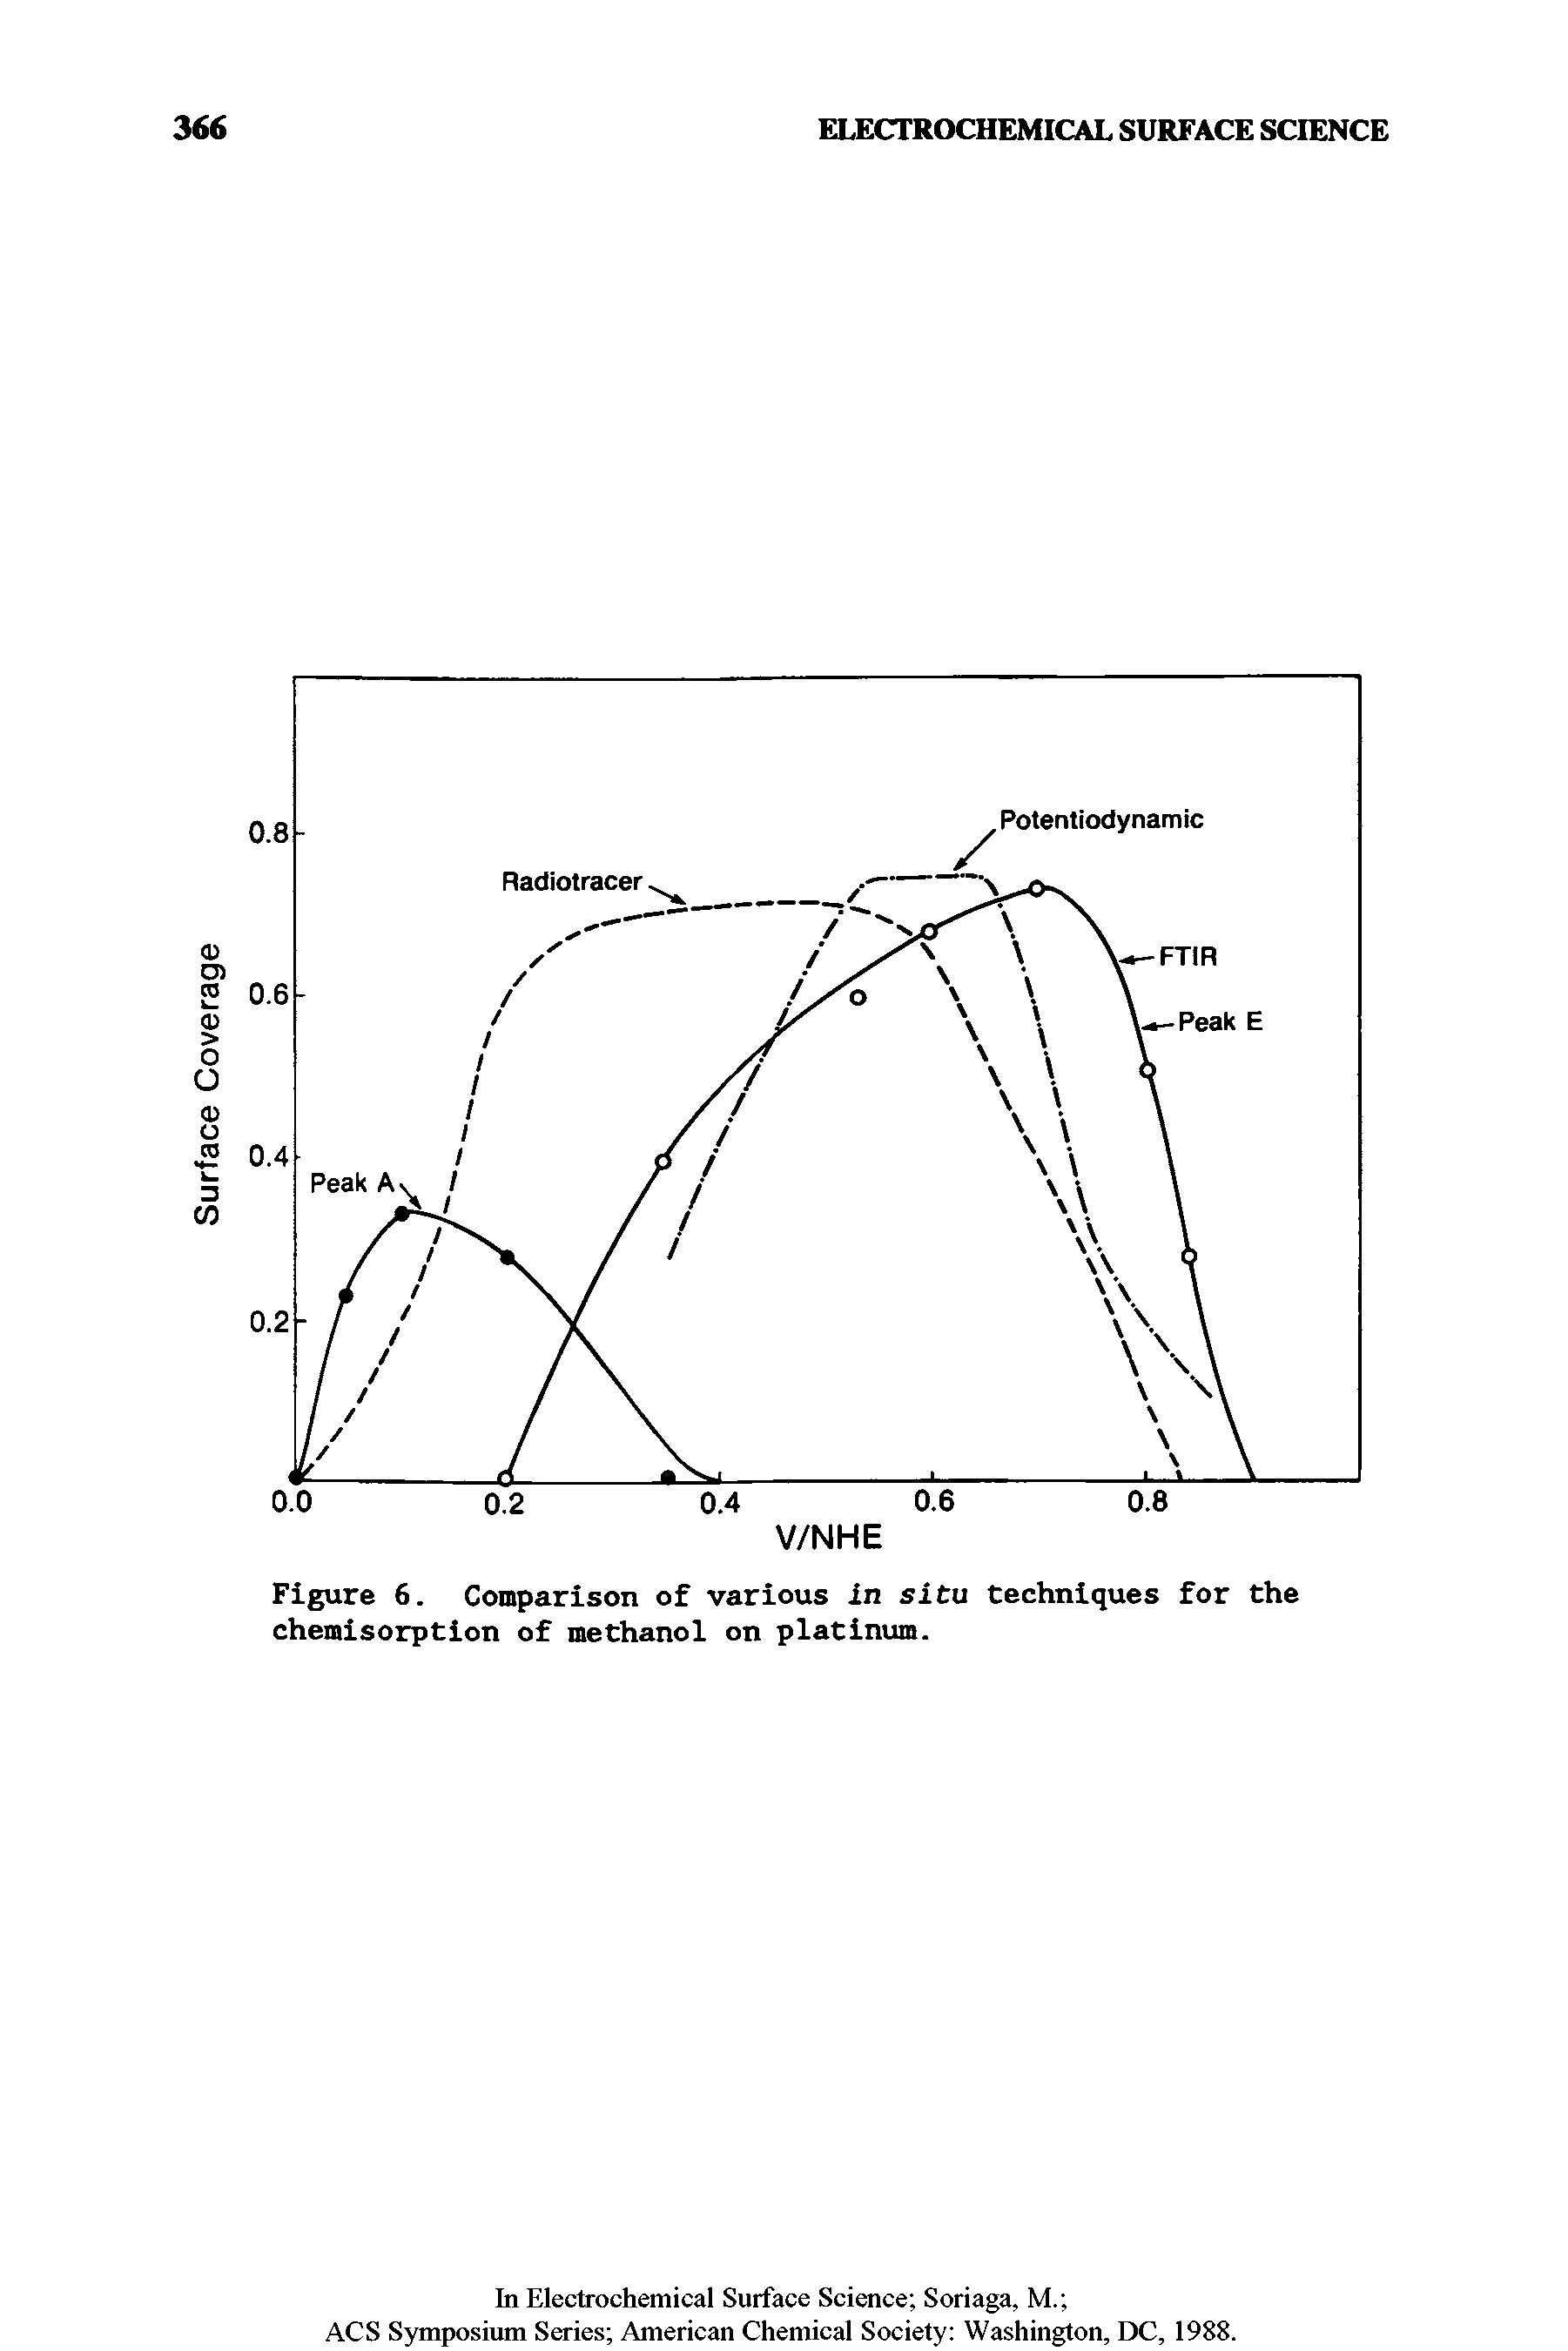 Figure 6. Comparison of various in situ techniques for the chemisorption of methanol on platinum.